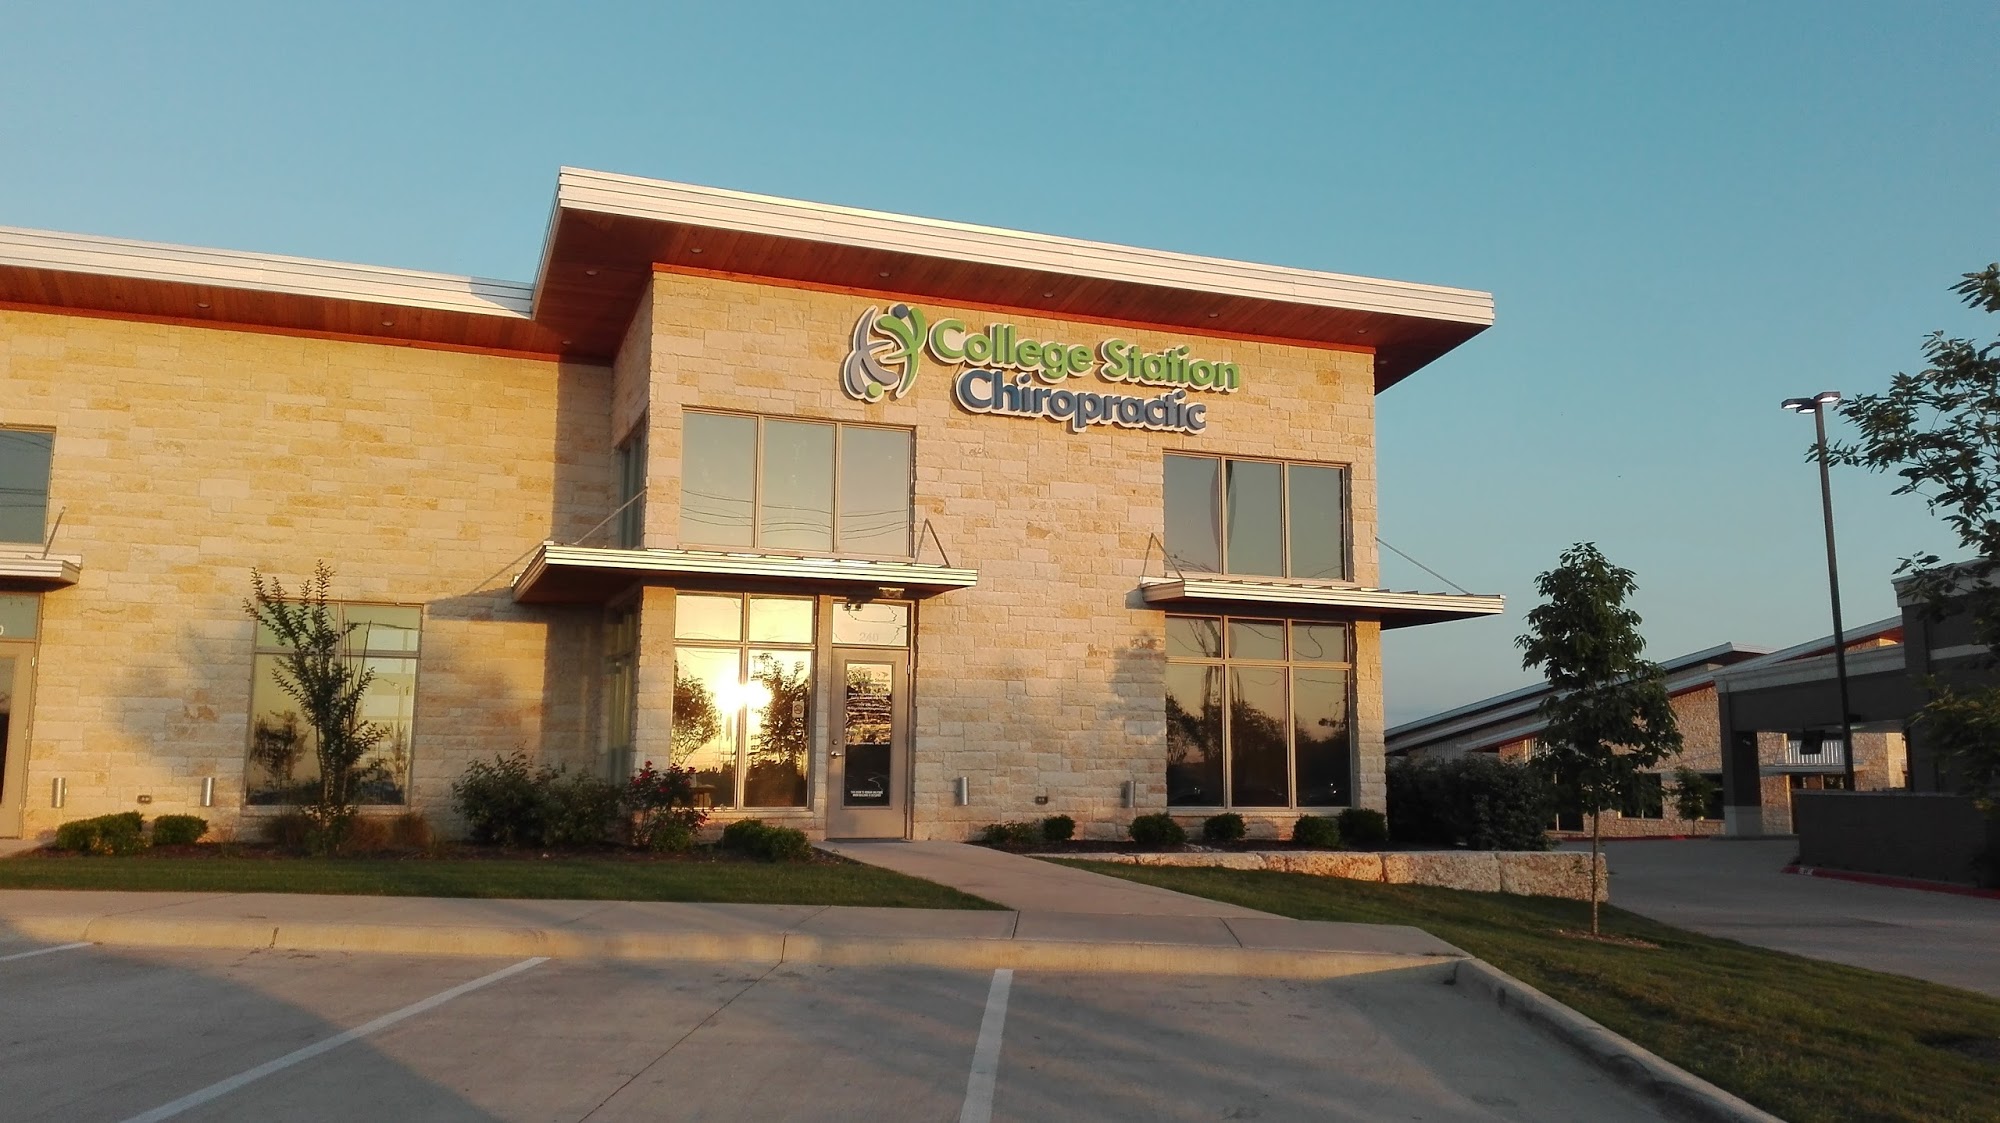 College Station Chiropractic